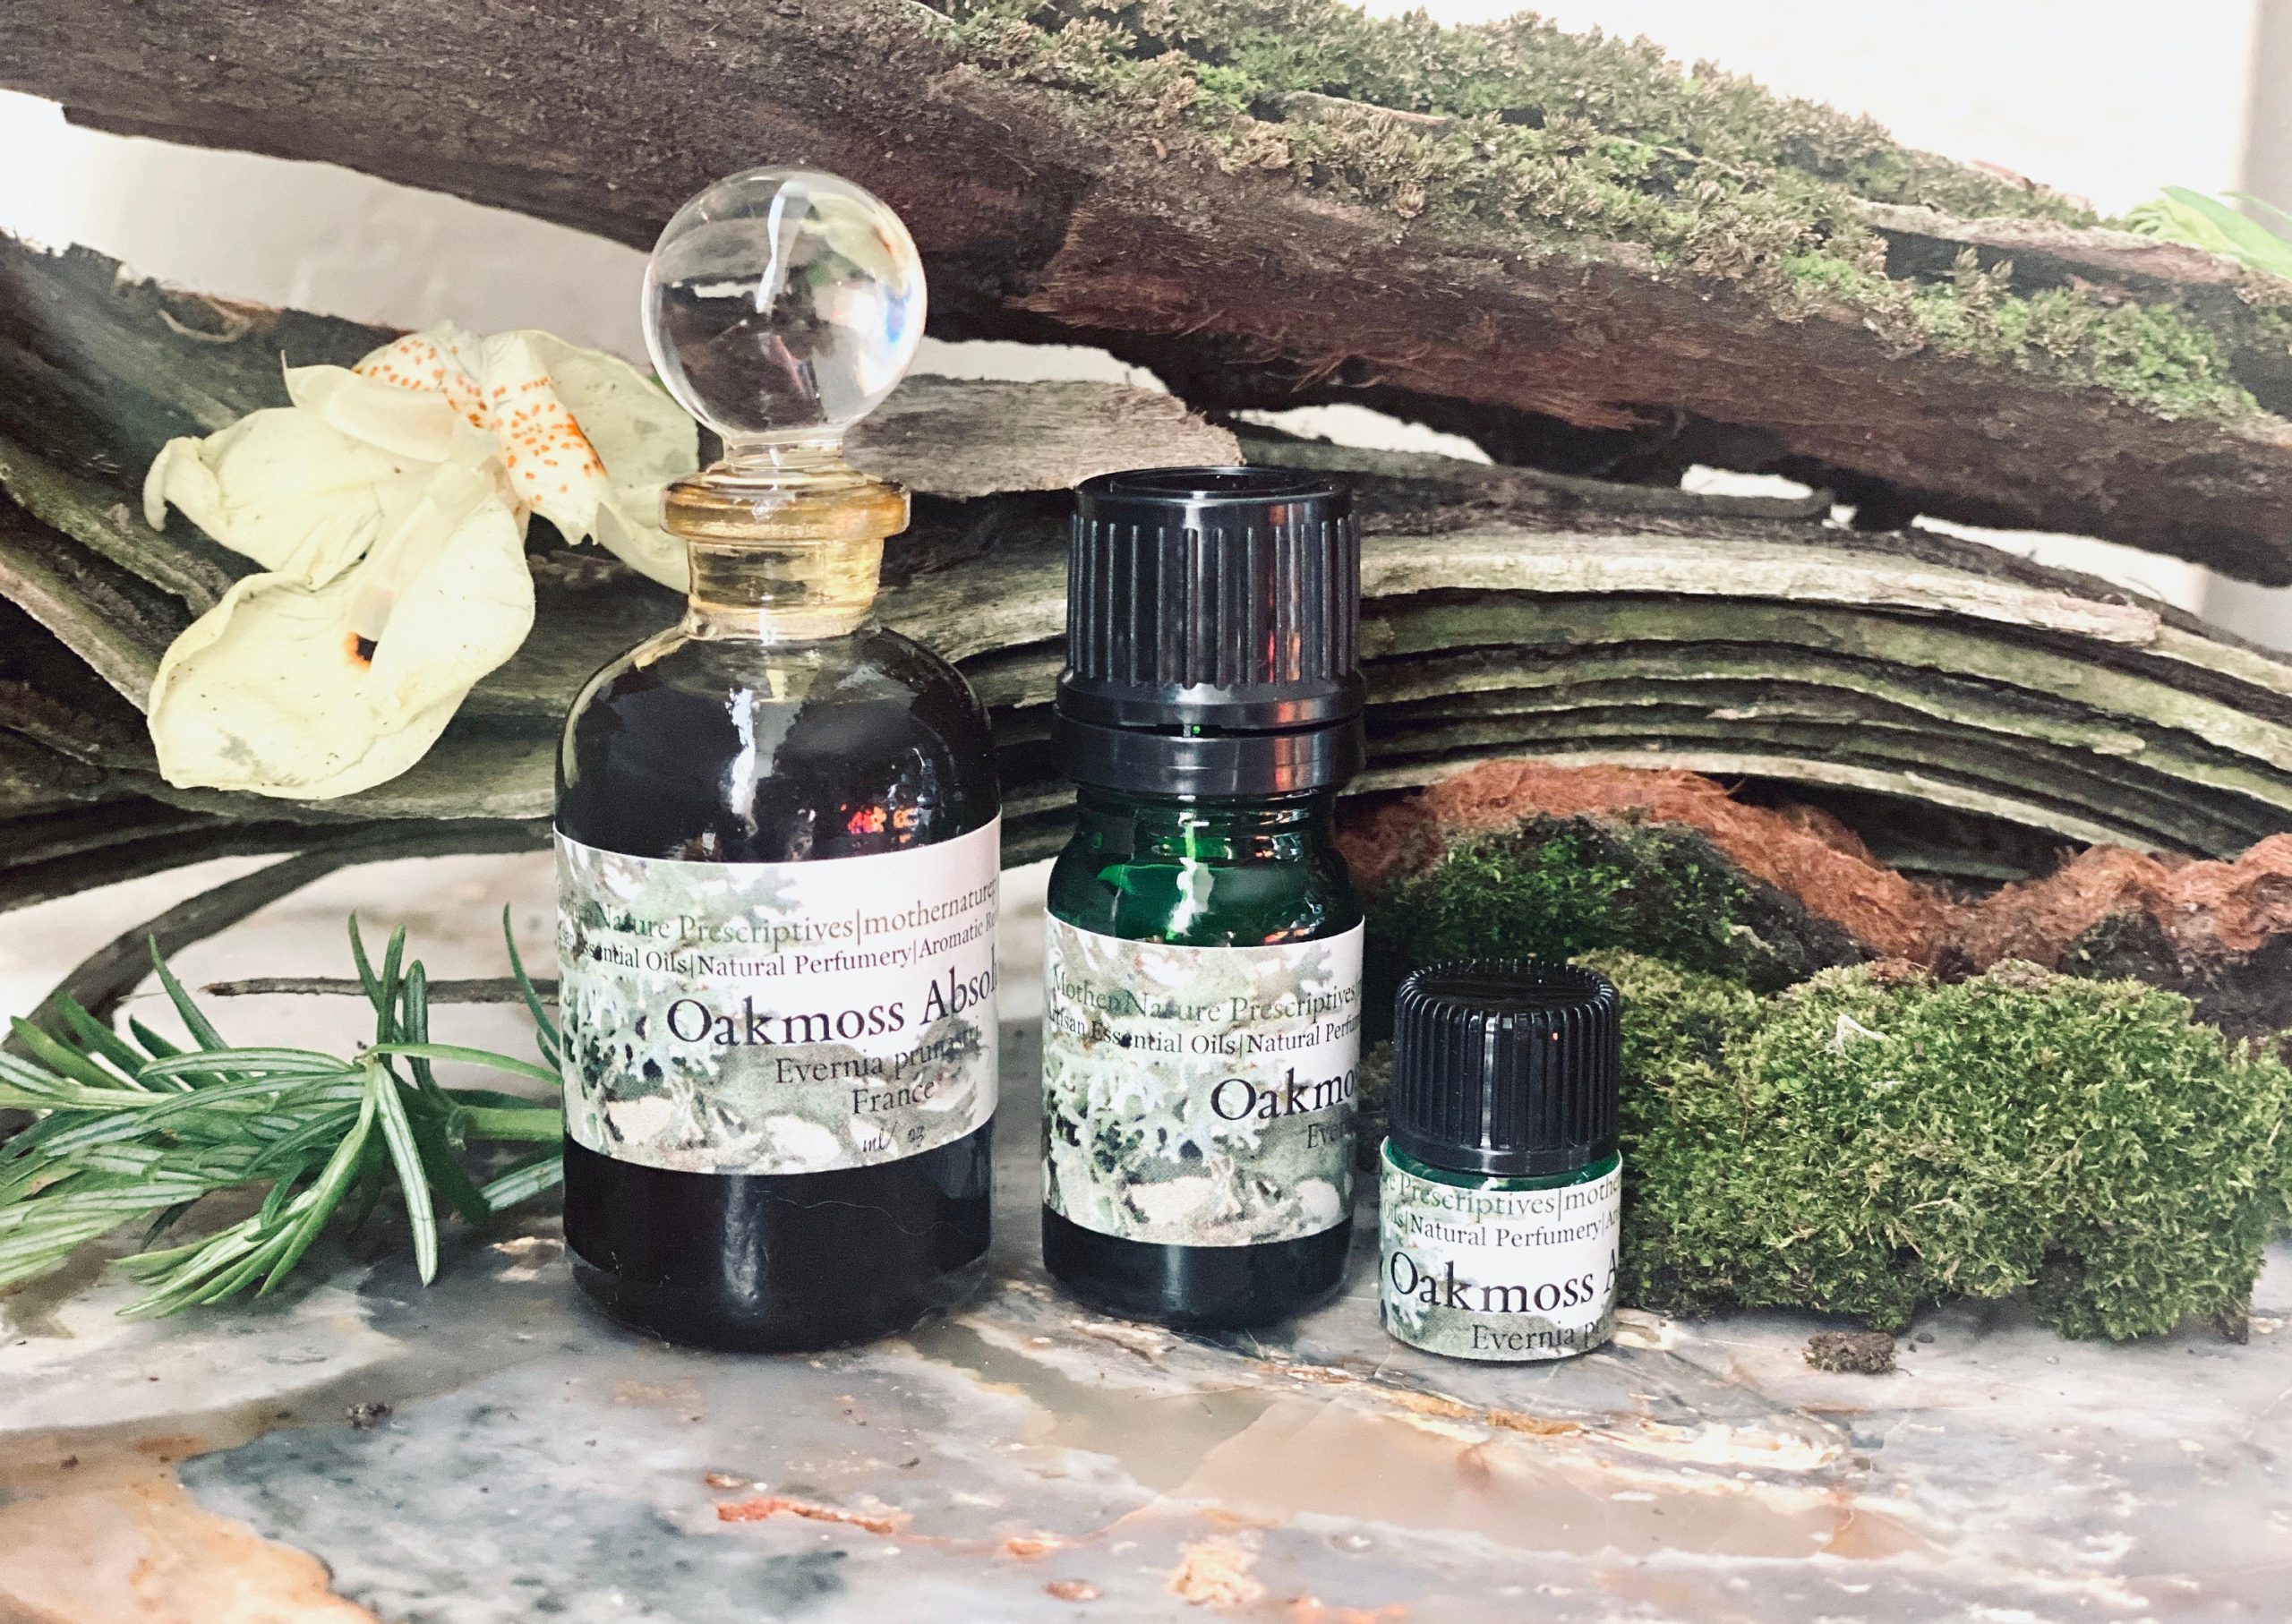 Oakmoss Absolute Oil - Essential Oil Apothecary